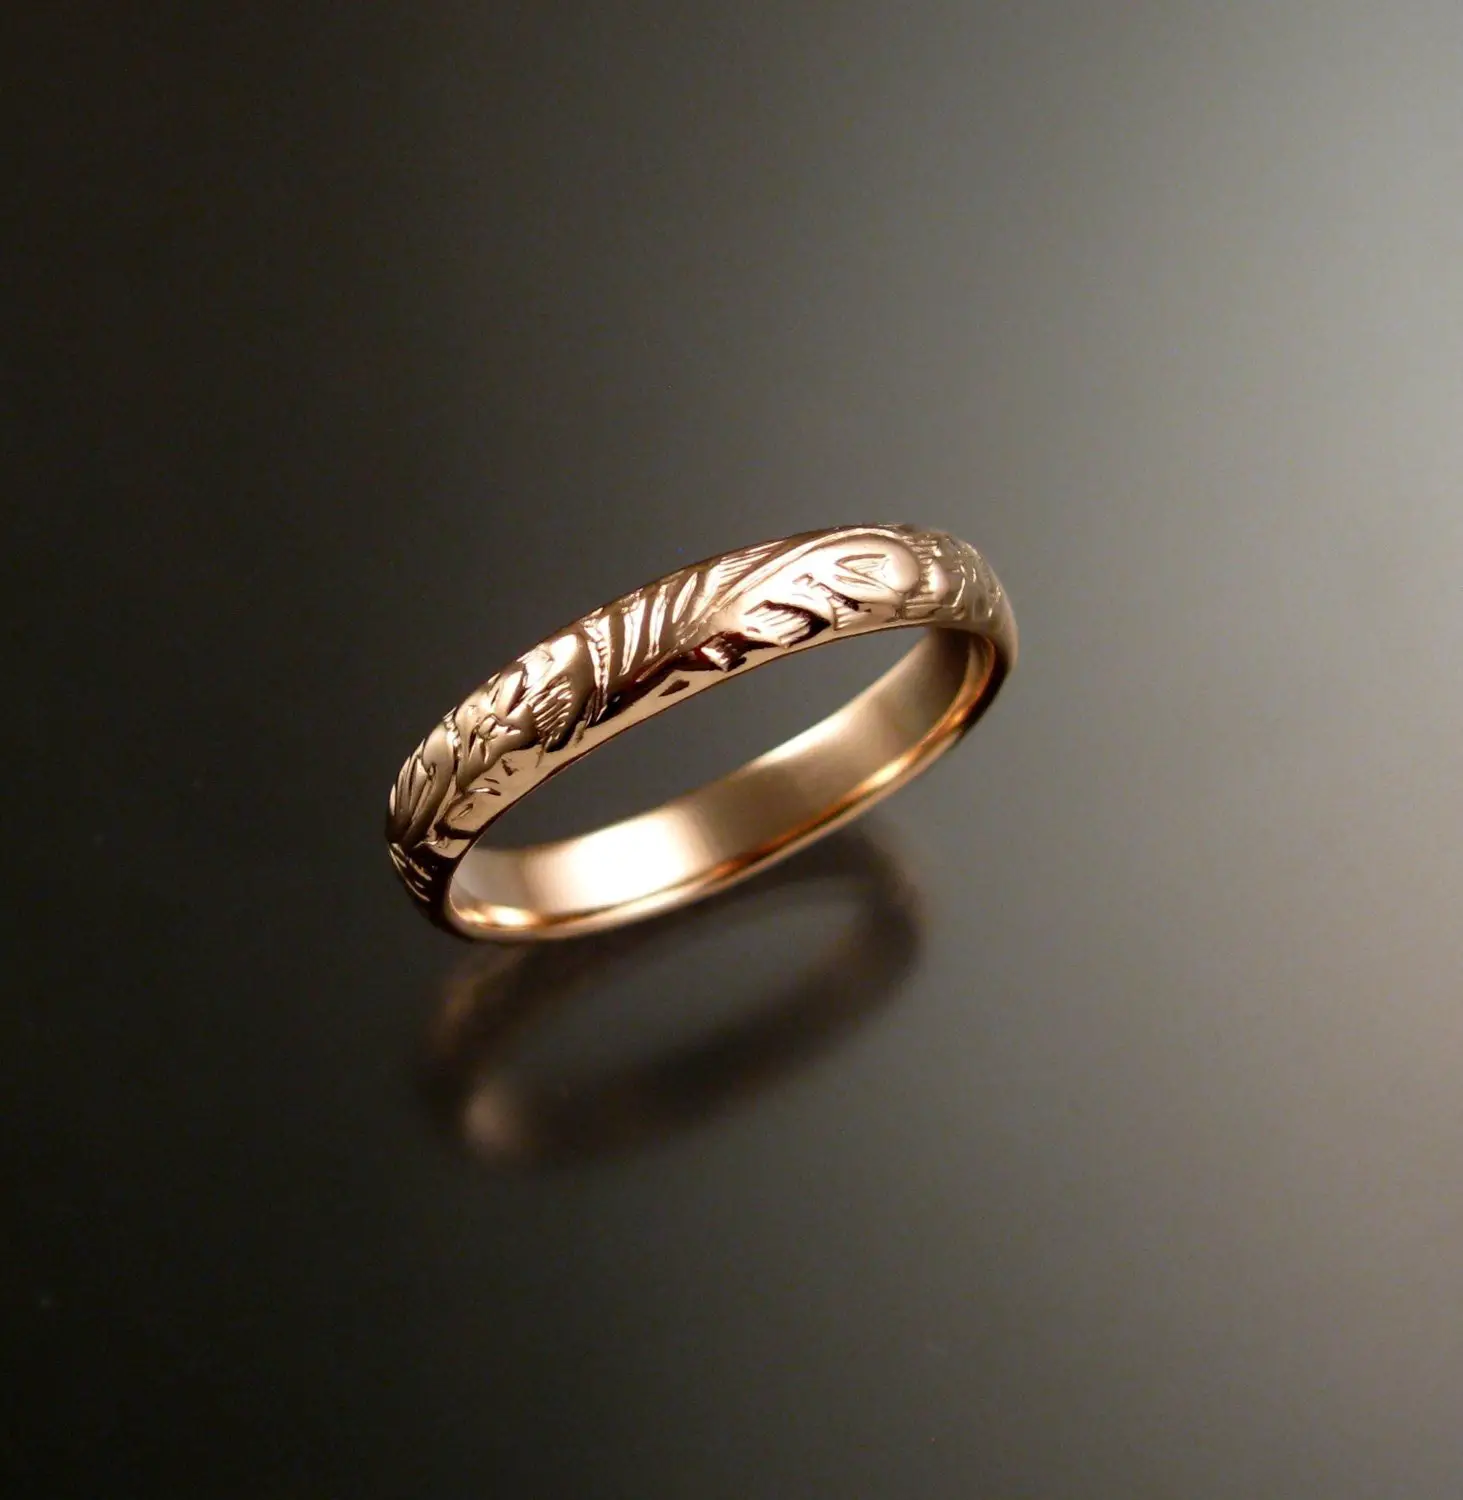 Rose Gold 4mm Floral pattern Band 14k wedding ring made to ...